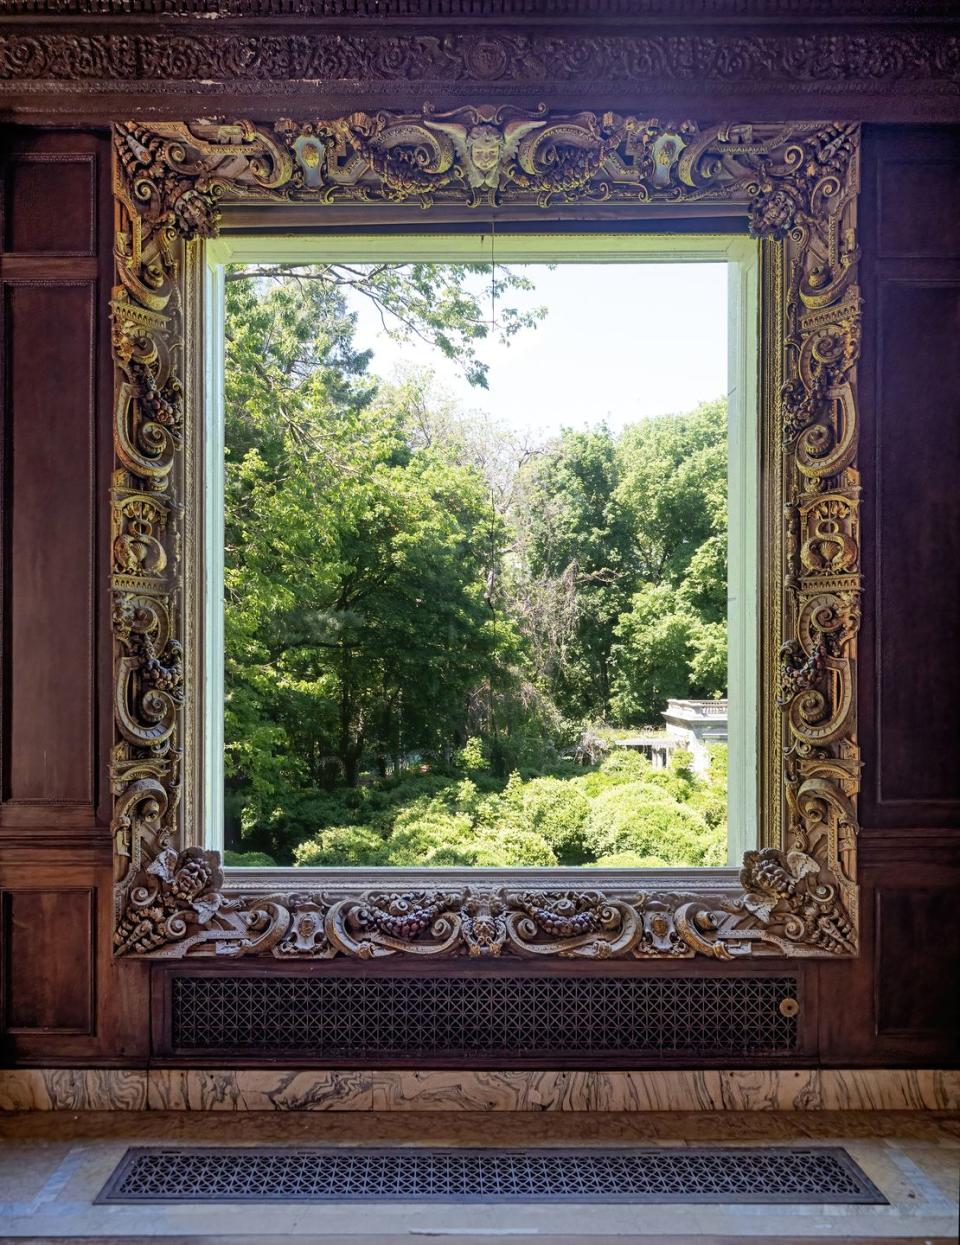 This picture-perfect window is just one example of the ornate detailing to be found throughout the home.